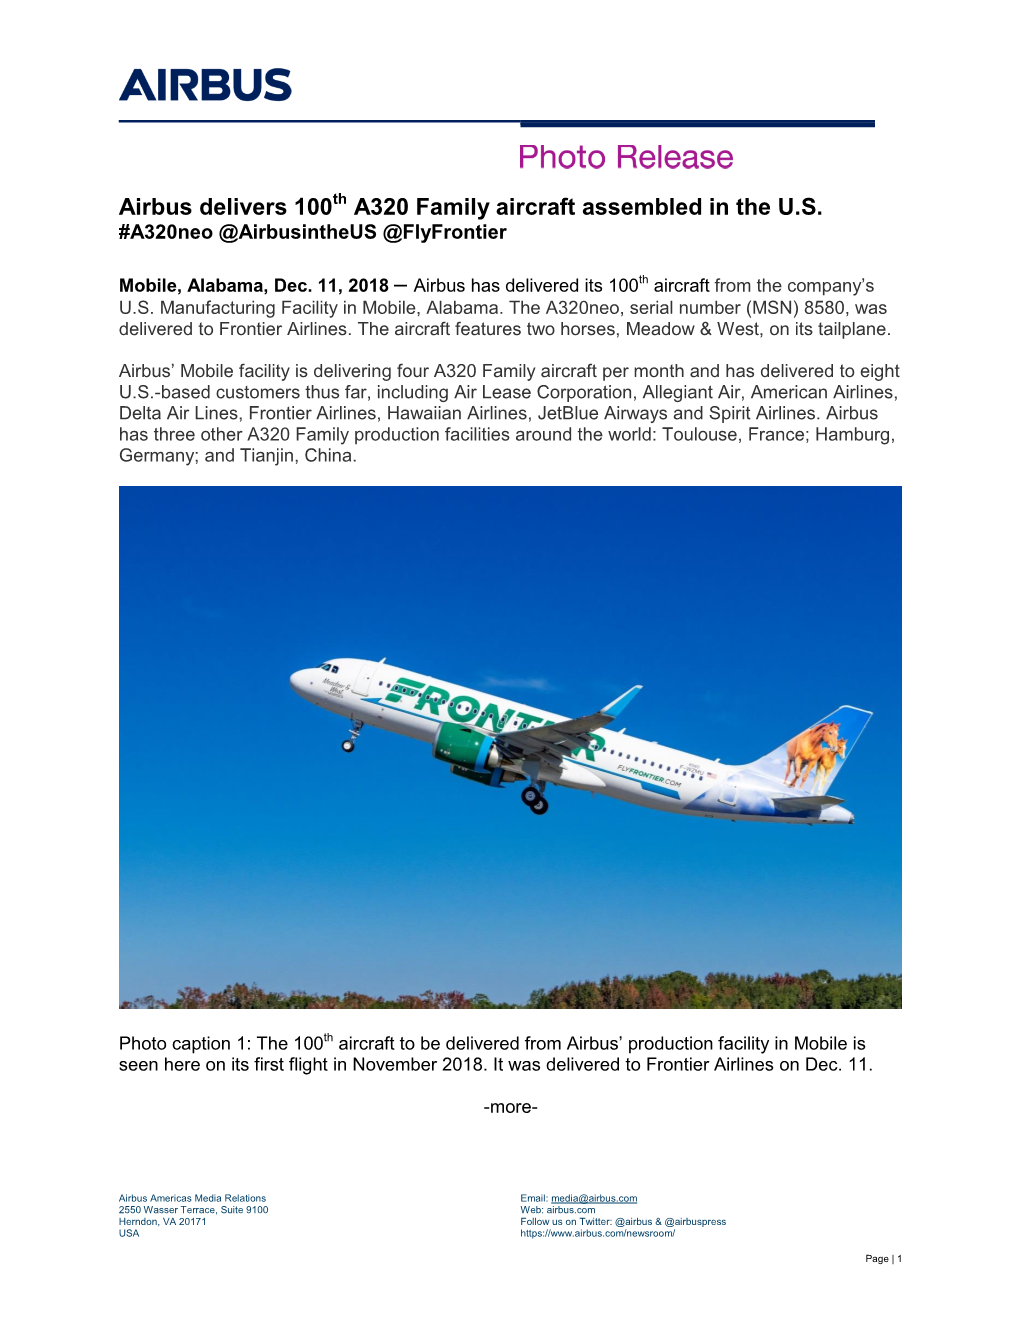 Airbus Delivers 100Th A320 Family Aircraft Assembled in the U.S. #A320neo @Airbusintheus @Flyfrontier